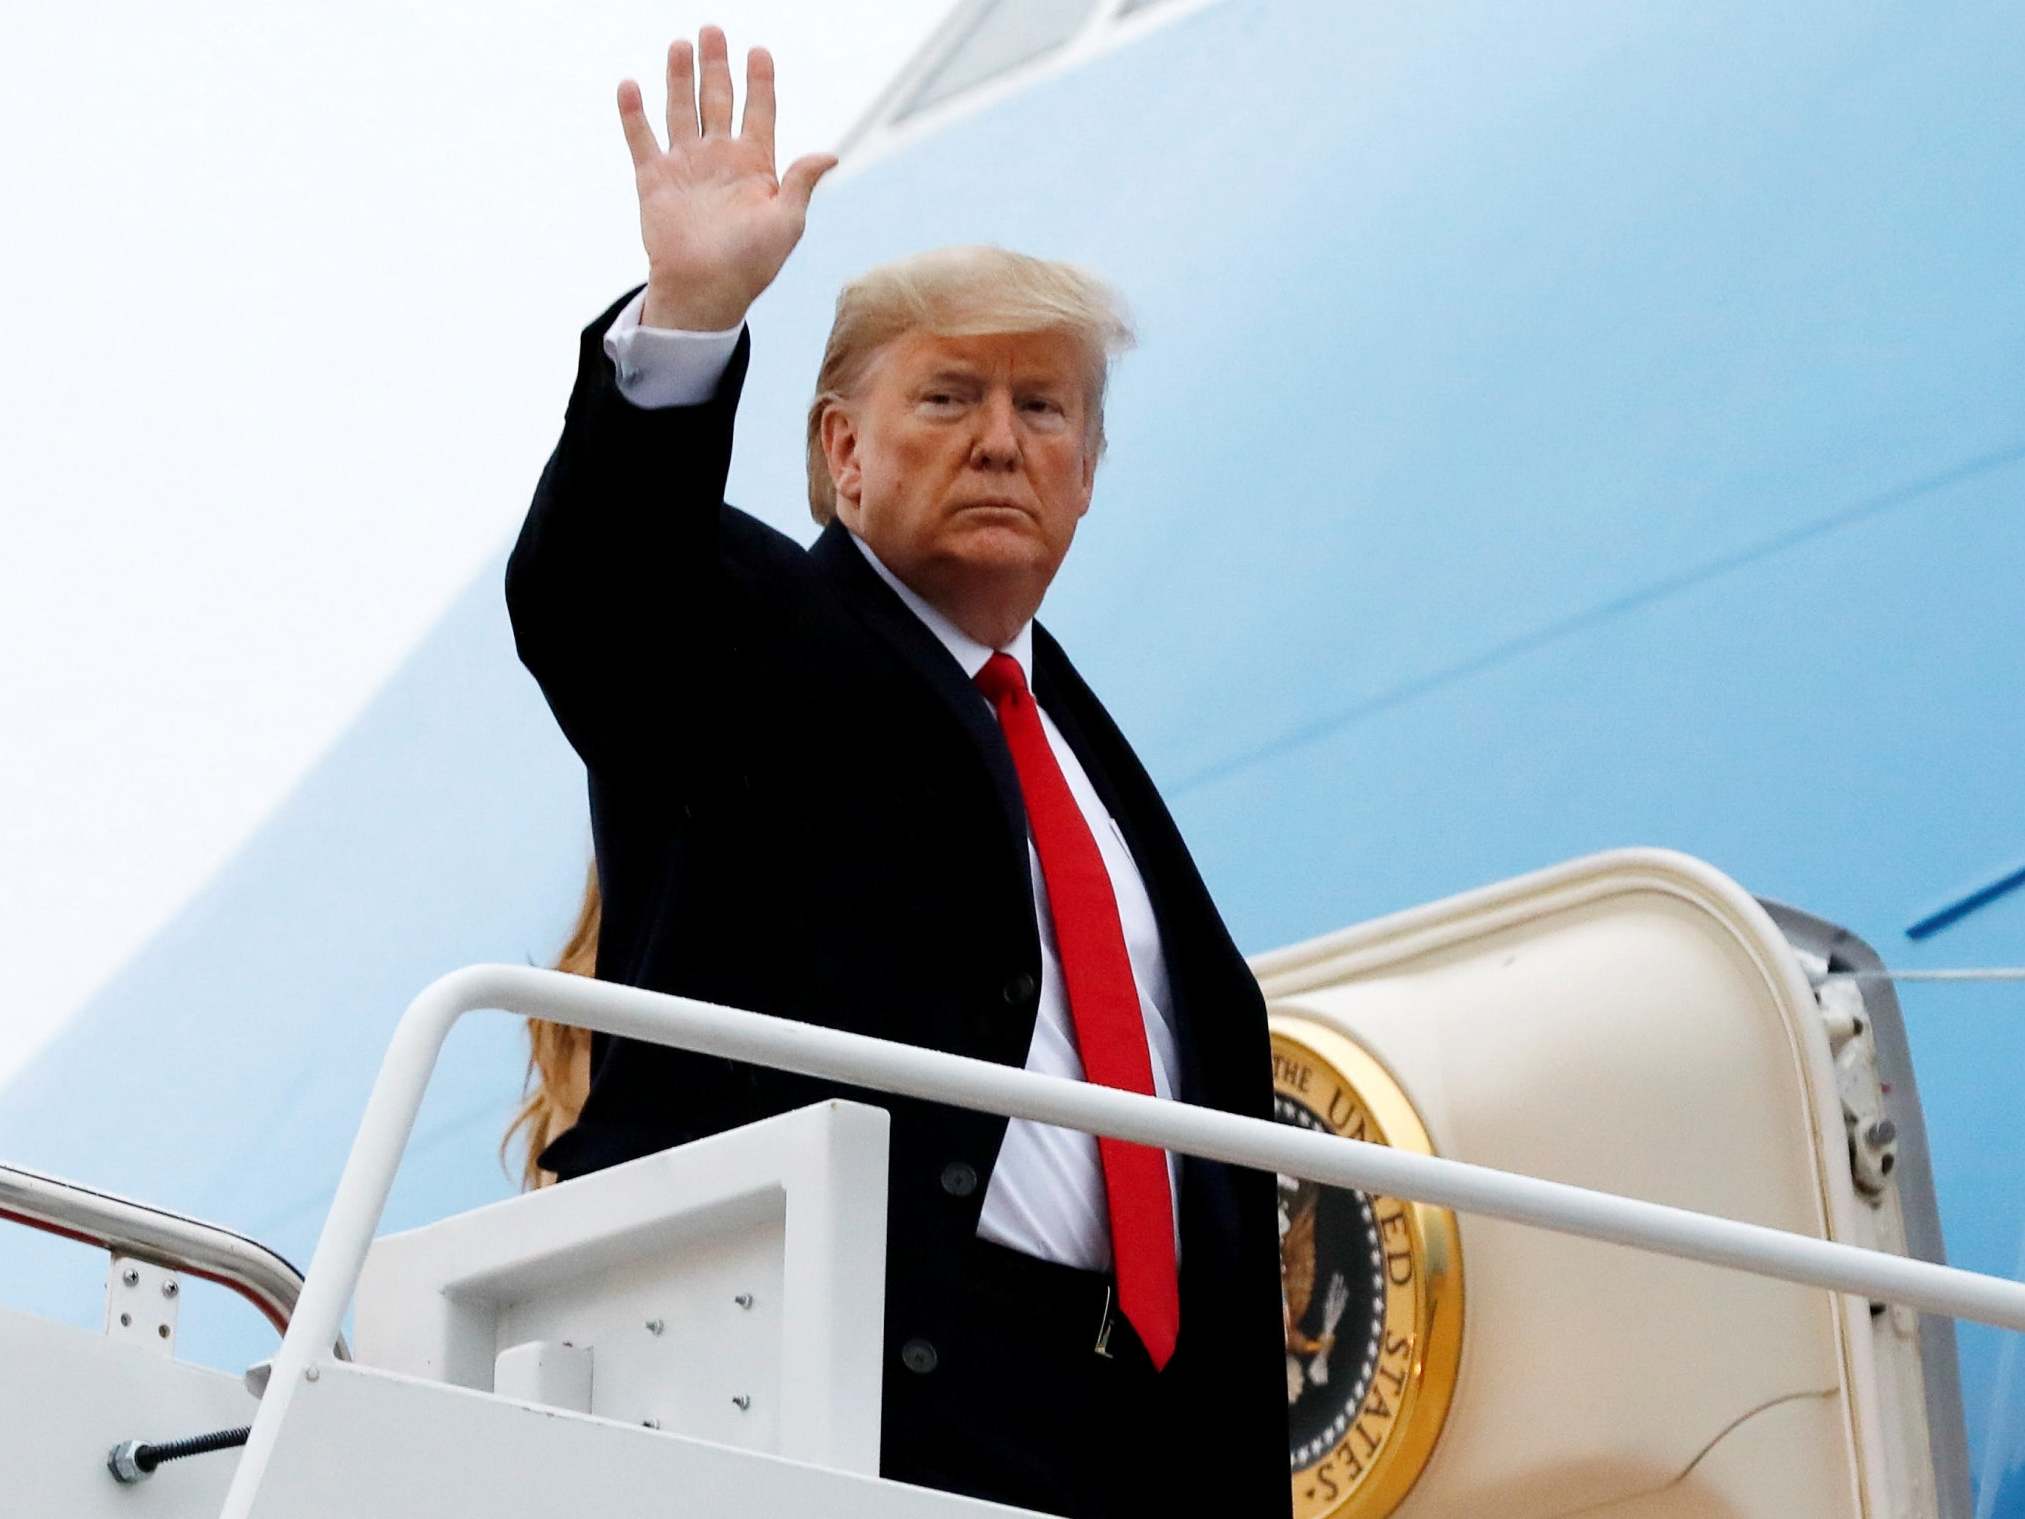 Donald Trump waves as he boards Air Force One on 31 January